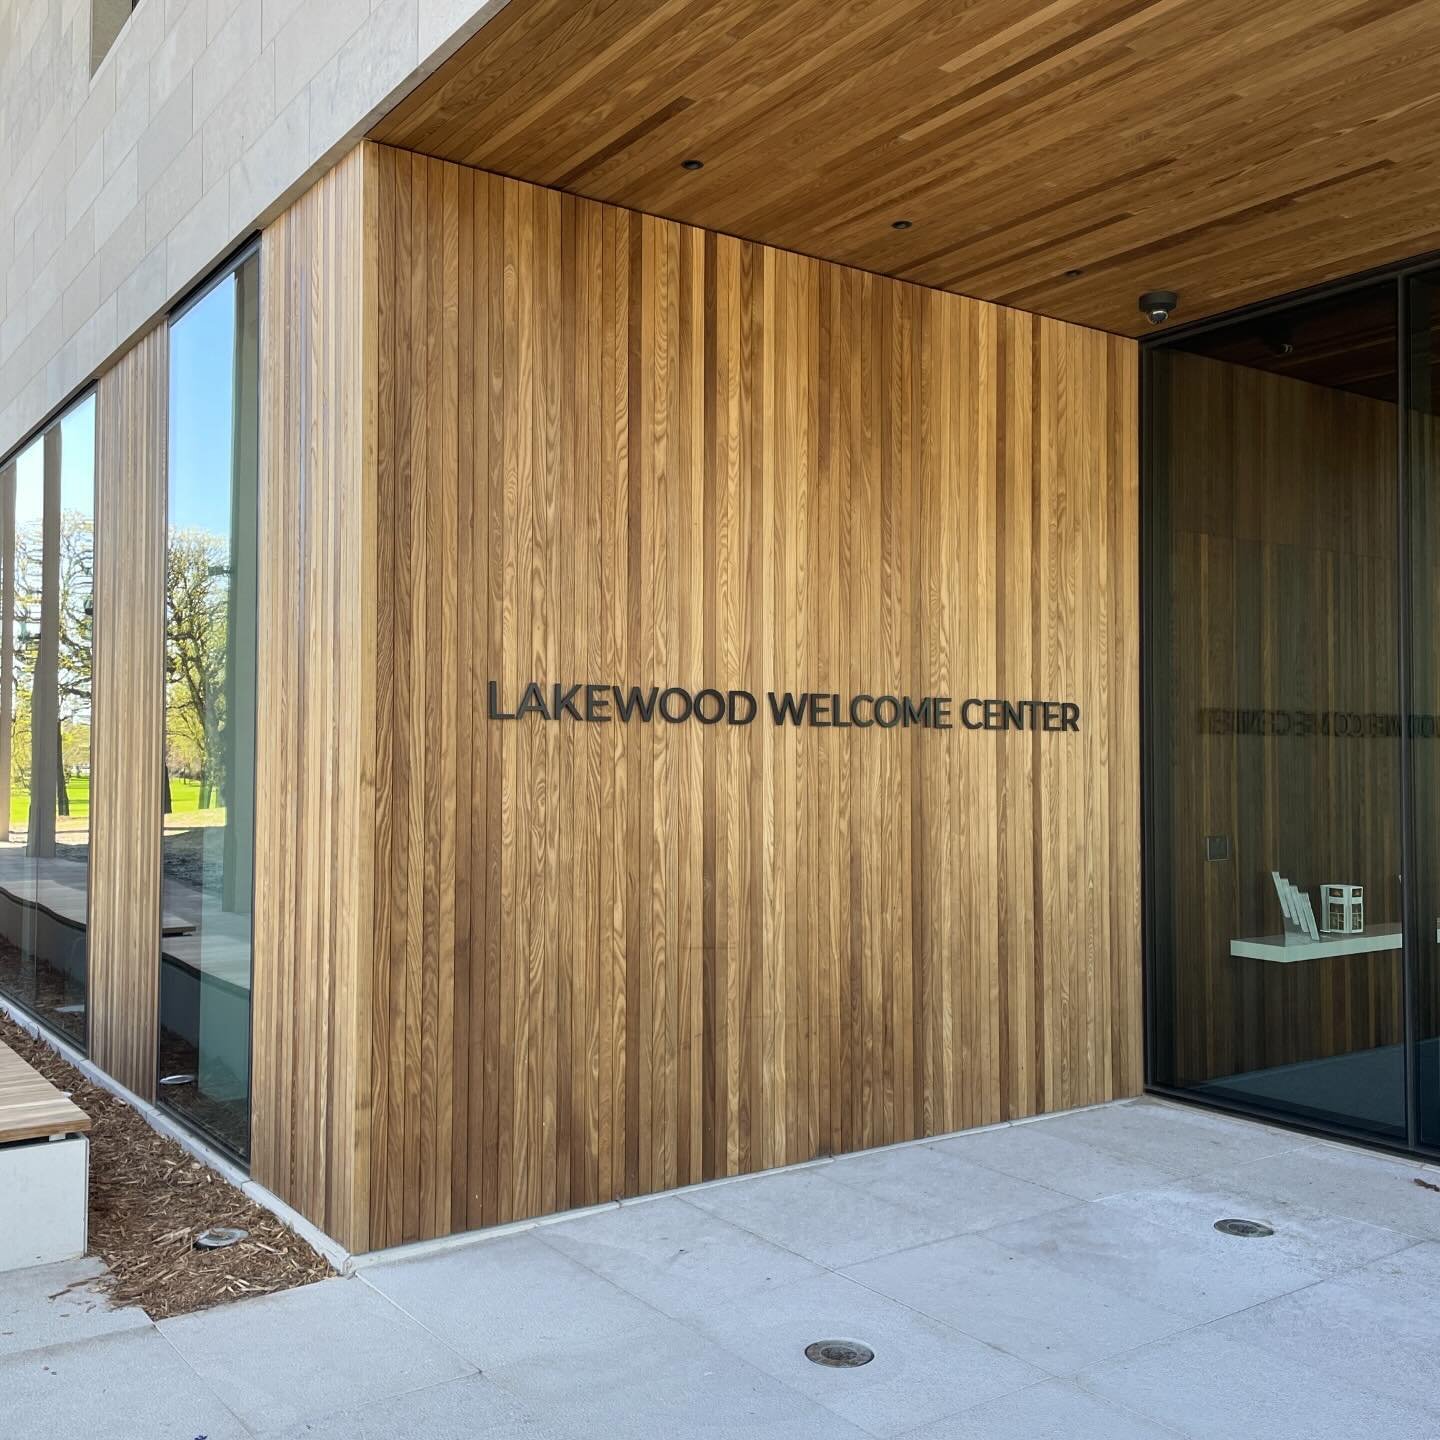 Arbor Wood Co. thermally modified ash siding and dimensional lumber helping create a very warm welcome at Lakewood Cemetery in Minneapolis, MN. 

Architect: @snowkreilich 
General Contractor: @jedunnconstruction 
Distributor: @intecturalusa 

#arborw